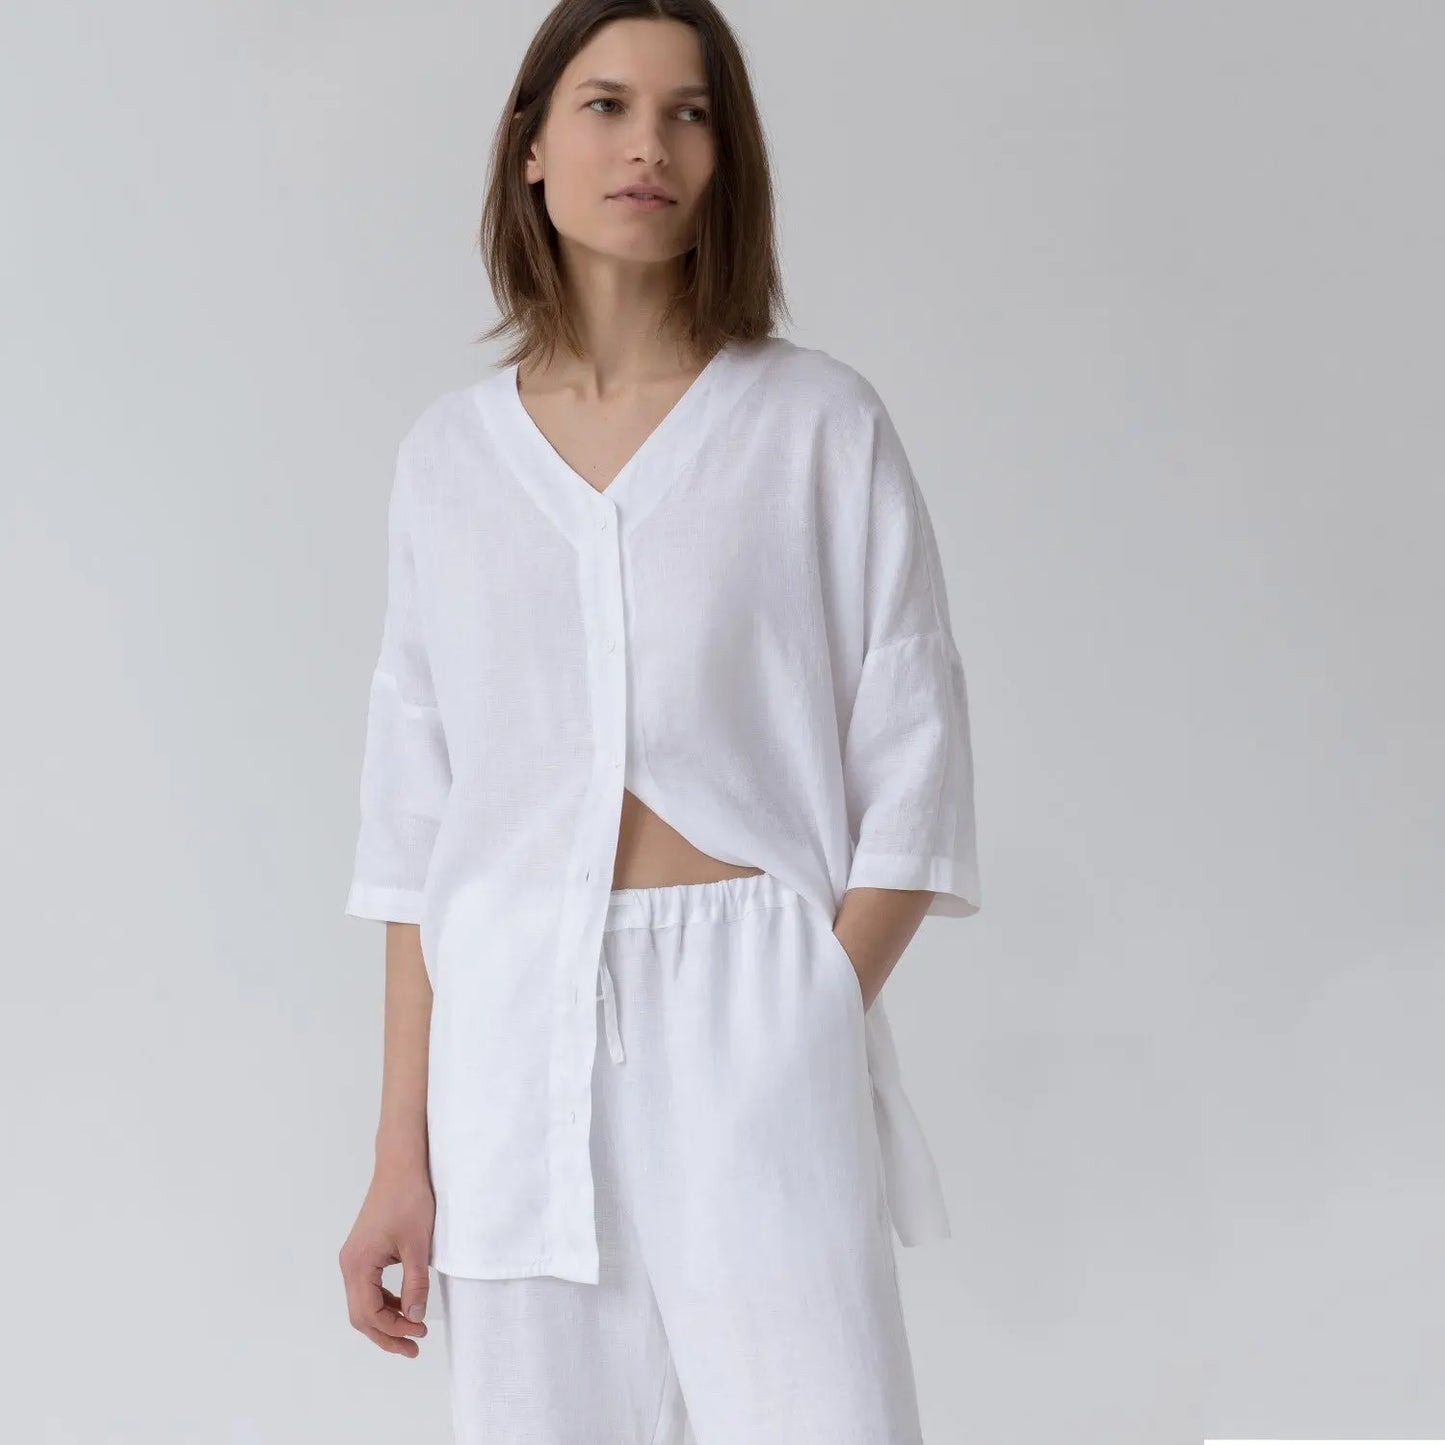 A woman in white Linen Primrose loungewear set, featuring a V-neck shirt with 3/4-length sleeves and buttoned front, paired with relaxed fit trousers and an elastic waistband.